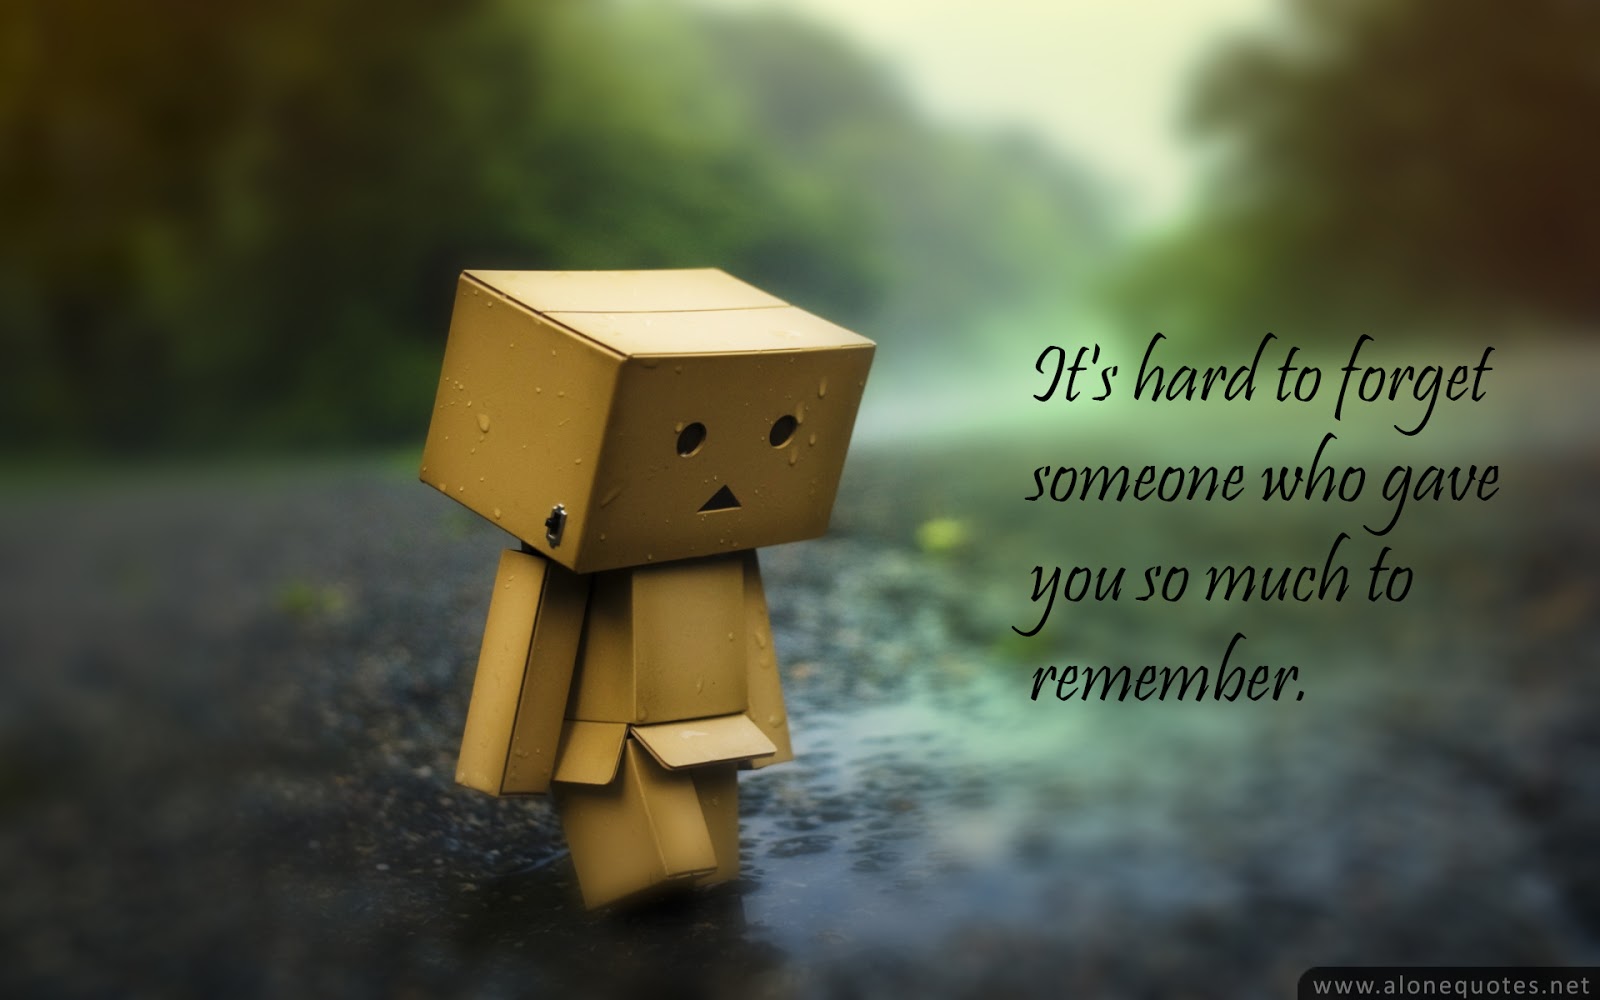 49+] Alone Wallpapers with Quotes - WallpaperSafari